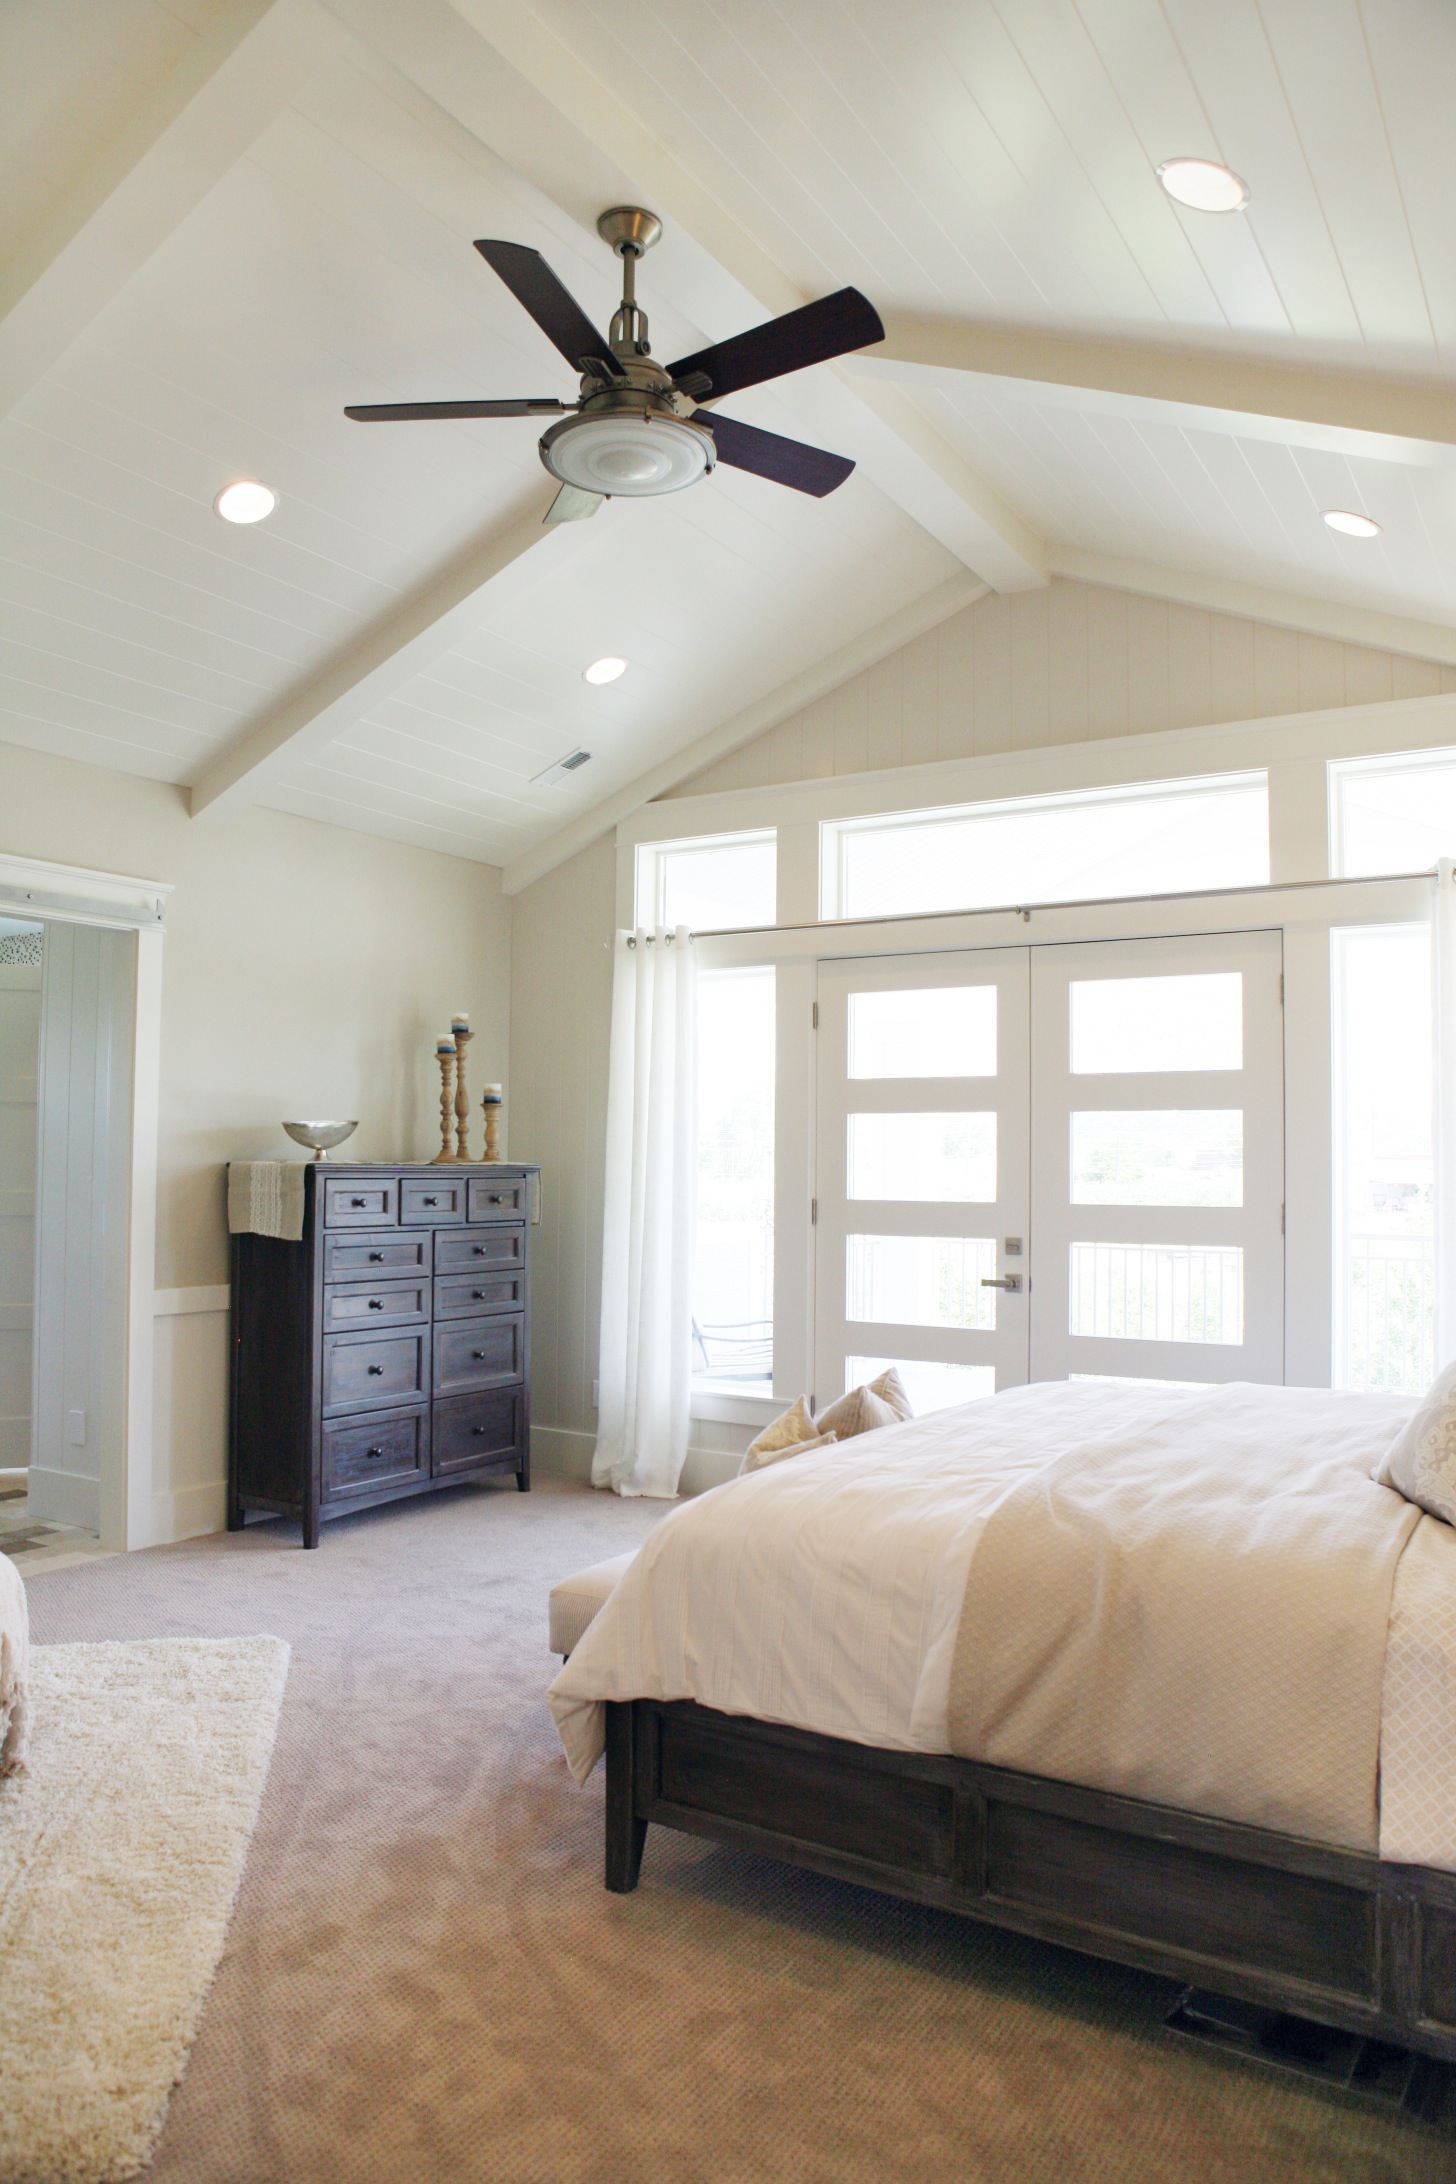 Guide on how to install Ceiling fan on vaulted ceiling | Warisan Lighting